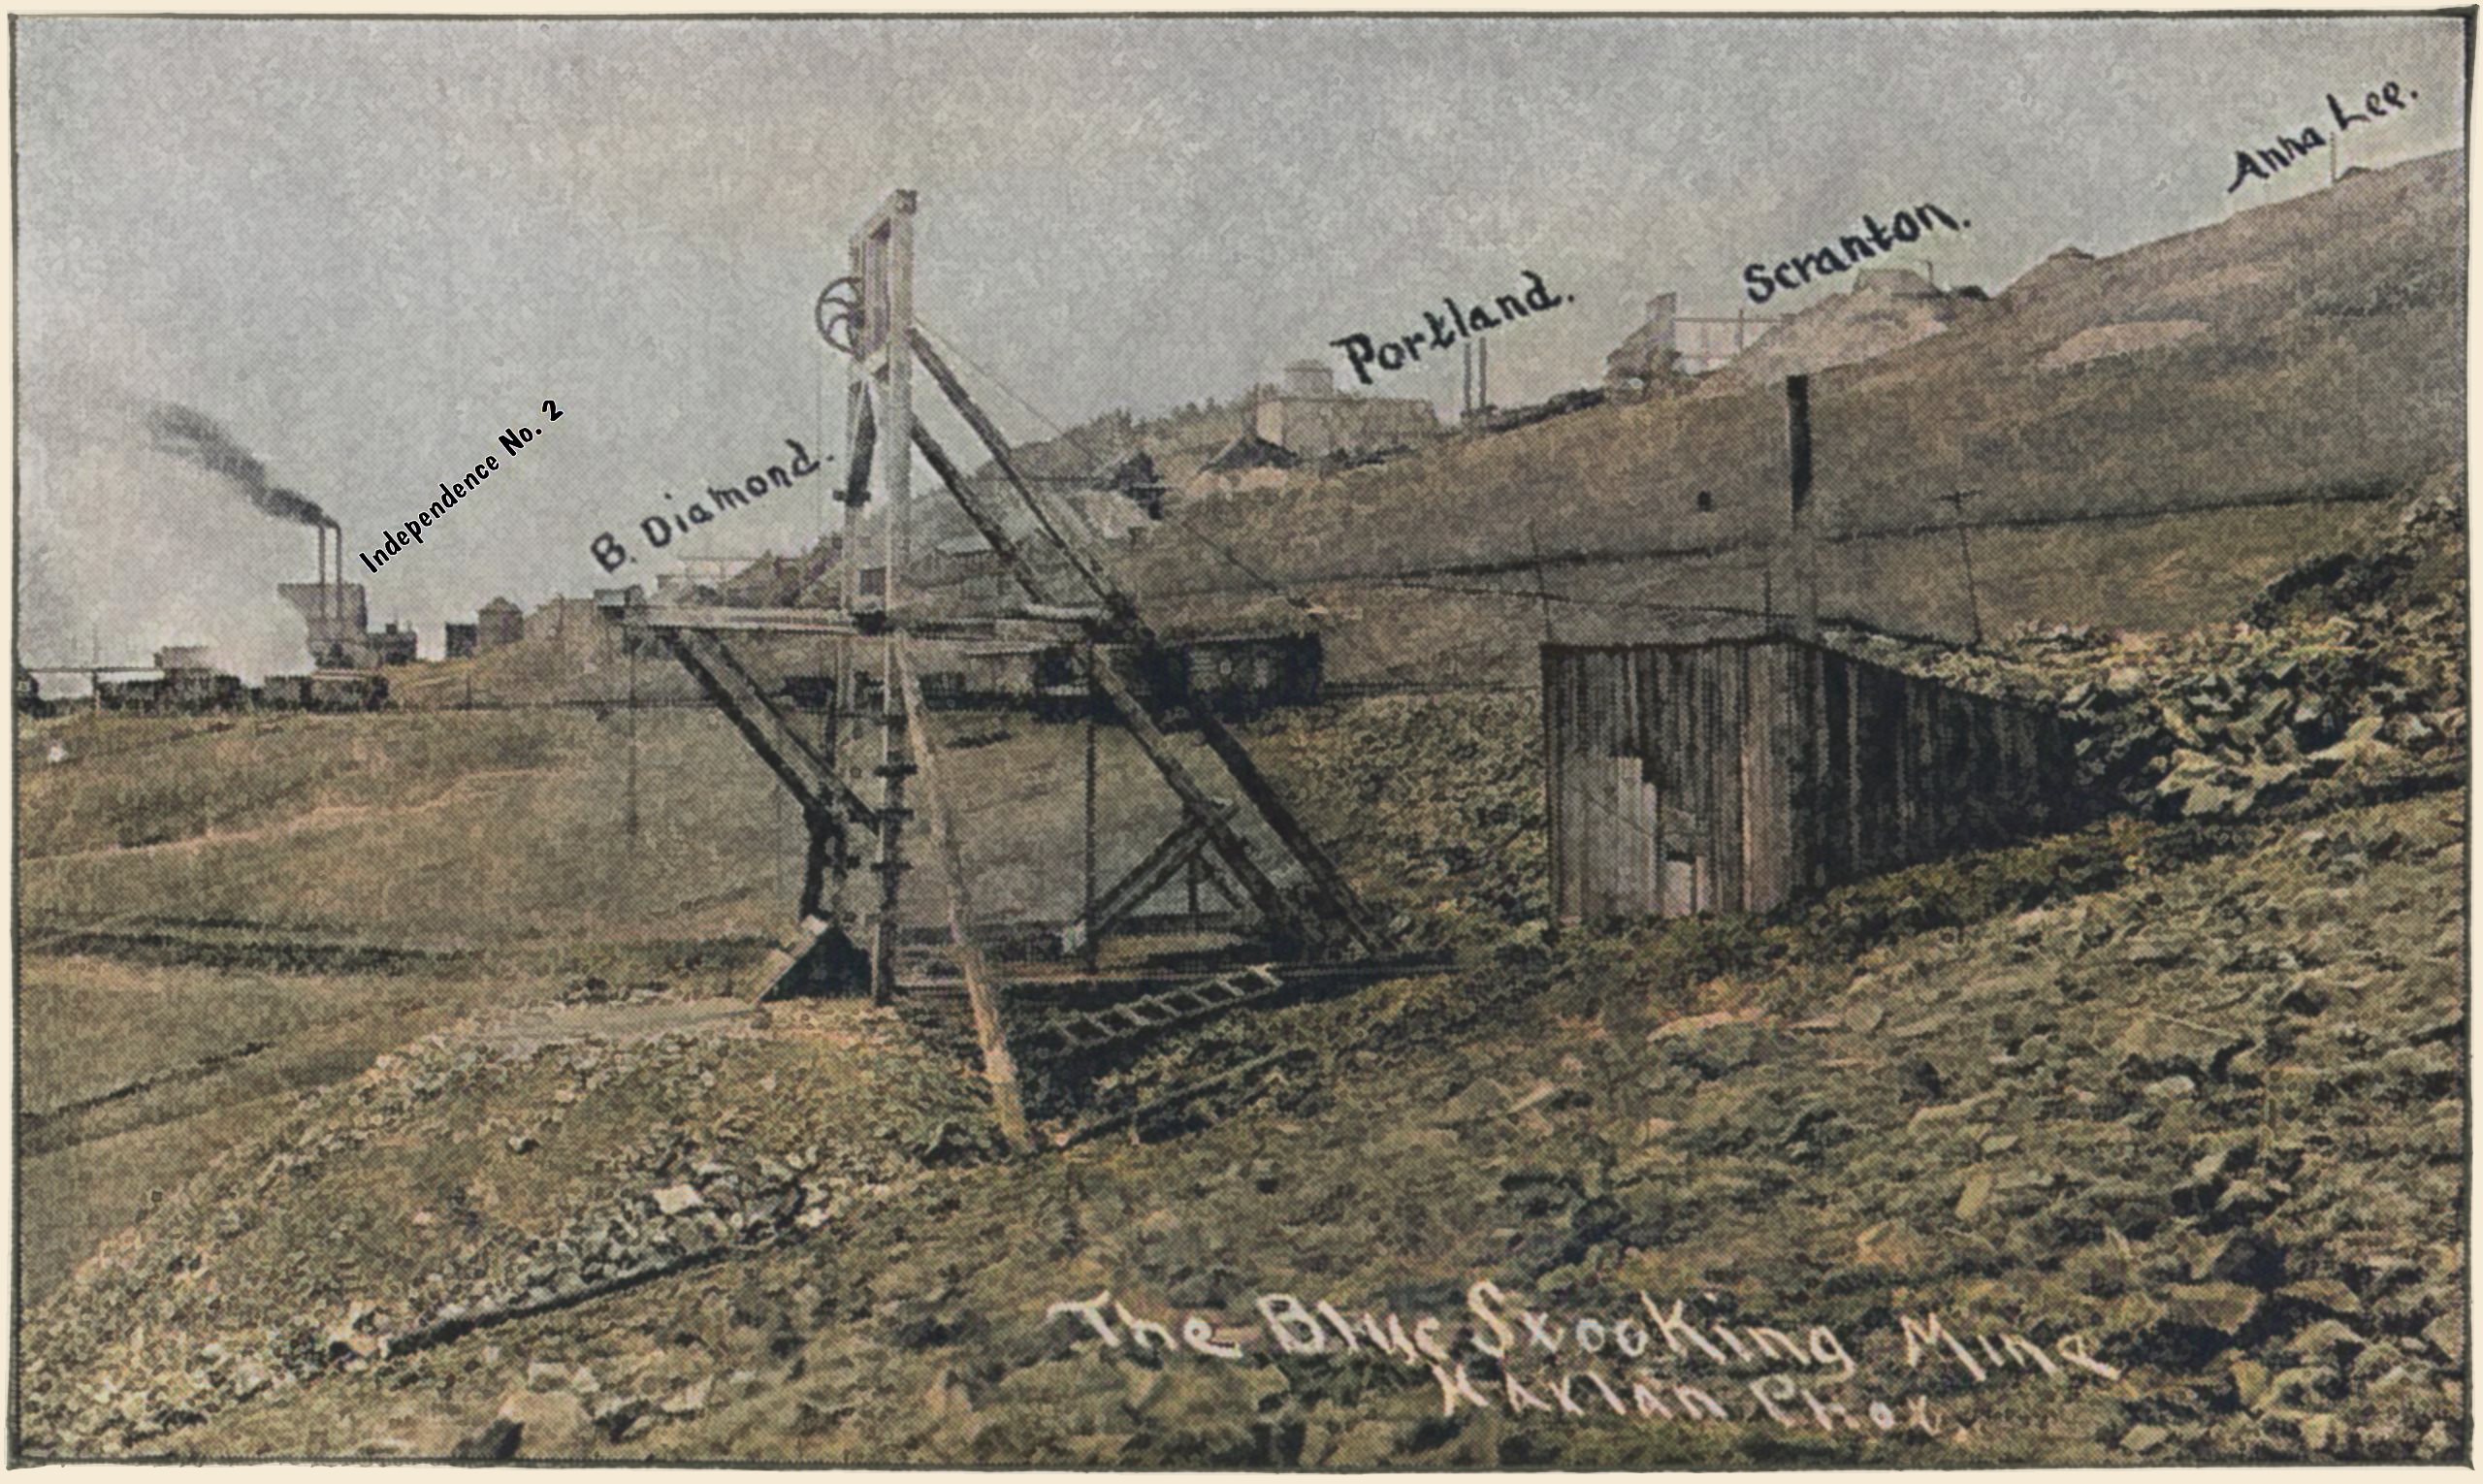 As this photo appears in a February/March 1896 publication, this dates the photo to no later than early 1896, but more likely to 1895, I doubt 1894 but can't see anything in the view to rule it out either...
   Why Mr. Harlan indicates Independence Mine No. 2 as Portland No. 2 I do not know, but this is at least the second image I've seen him do it on. Both are from around 1895/1896, so either that mine used to locally be known as that, or he just has his info crossed... Me think the latter. Other publications from this timeframe say that the structure is the Independence No. 2 Mine, including a Sanborn fire Insurance Map. The Portland No. 2 is further uphill from No. 1, in this view that would be outside the view at top right.
   The small mine in the foreground is operations on the Blue Stocking Mine, not sure which part of the claim as per info in Hills 1900 Manual this claim is partly owned by two companies, whereas the Portland Gold Mining Company is one of those. Same is the Black Diamond, the Scranton and the Anna Lee mines, all marked out in this view, all of them also became part of the great Portland Gold Mining company.
   About middle of image, top/down, the Midland Terminal roadbed of the mainline along Battle Mountain is seen, and in just a couple of years this scene will change very much as the dumps grows to immense dimensions.
   I did procure the colored version of this image, if that is what you see. Source was grayish, or in common speech black & white. Used an online service and tweaked and worked with image to get what looks best to my eyes at the moment.